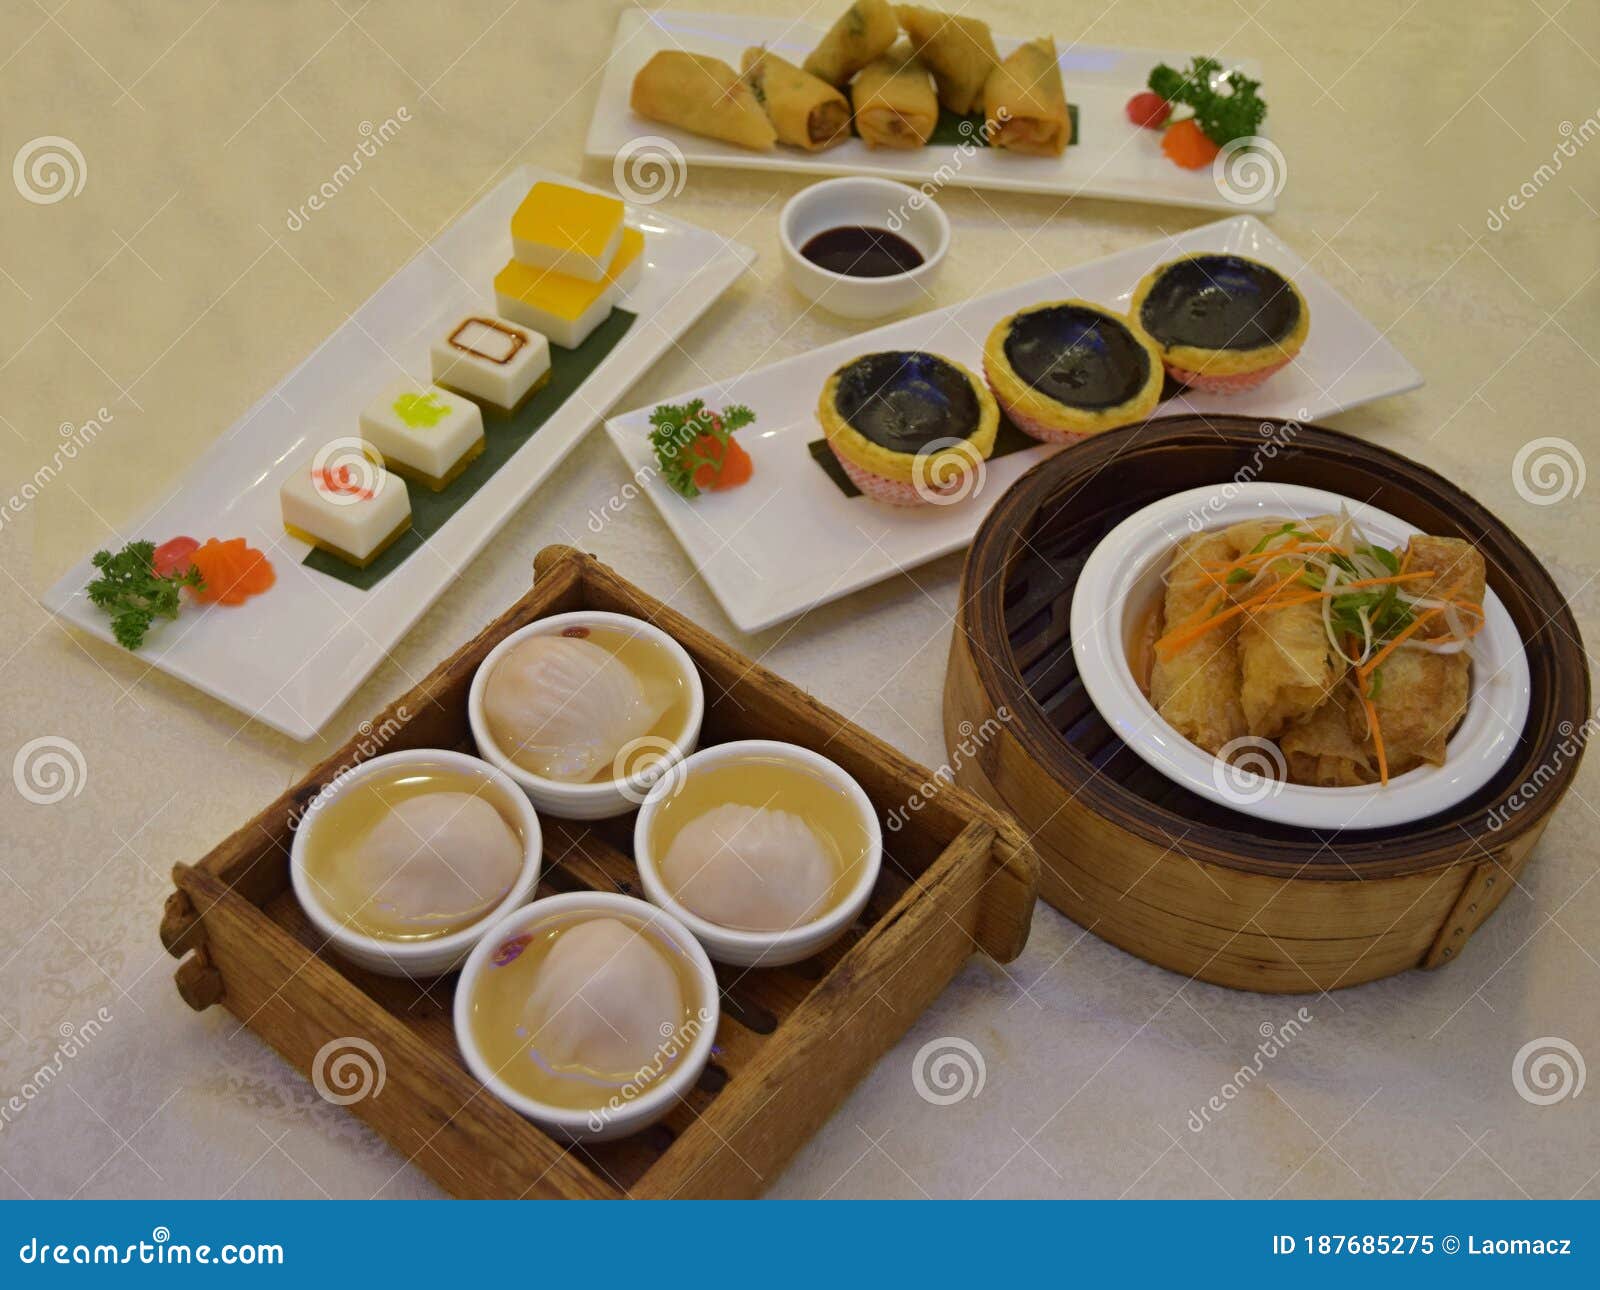 dim sum is a style of chinese cuisine, particularly cantonese.